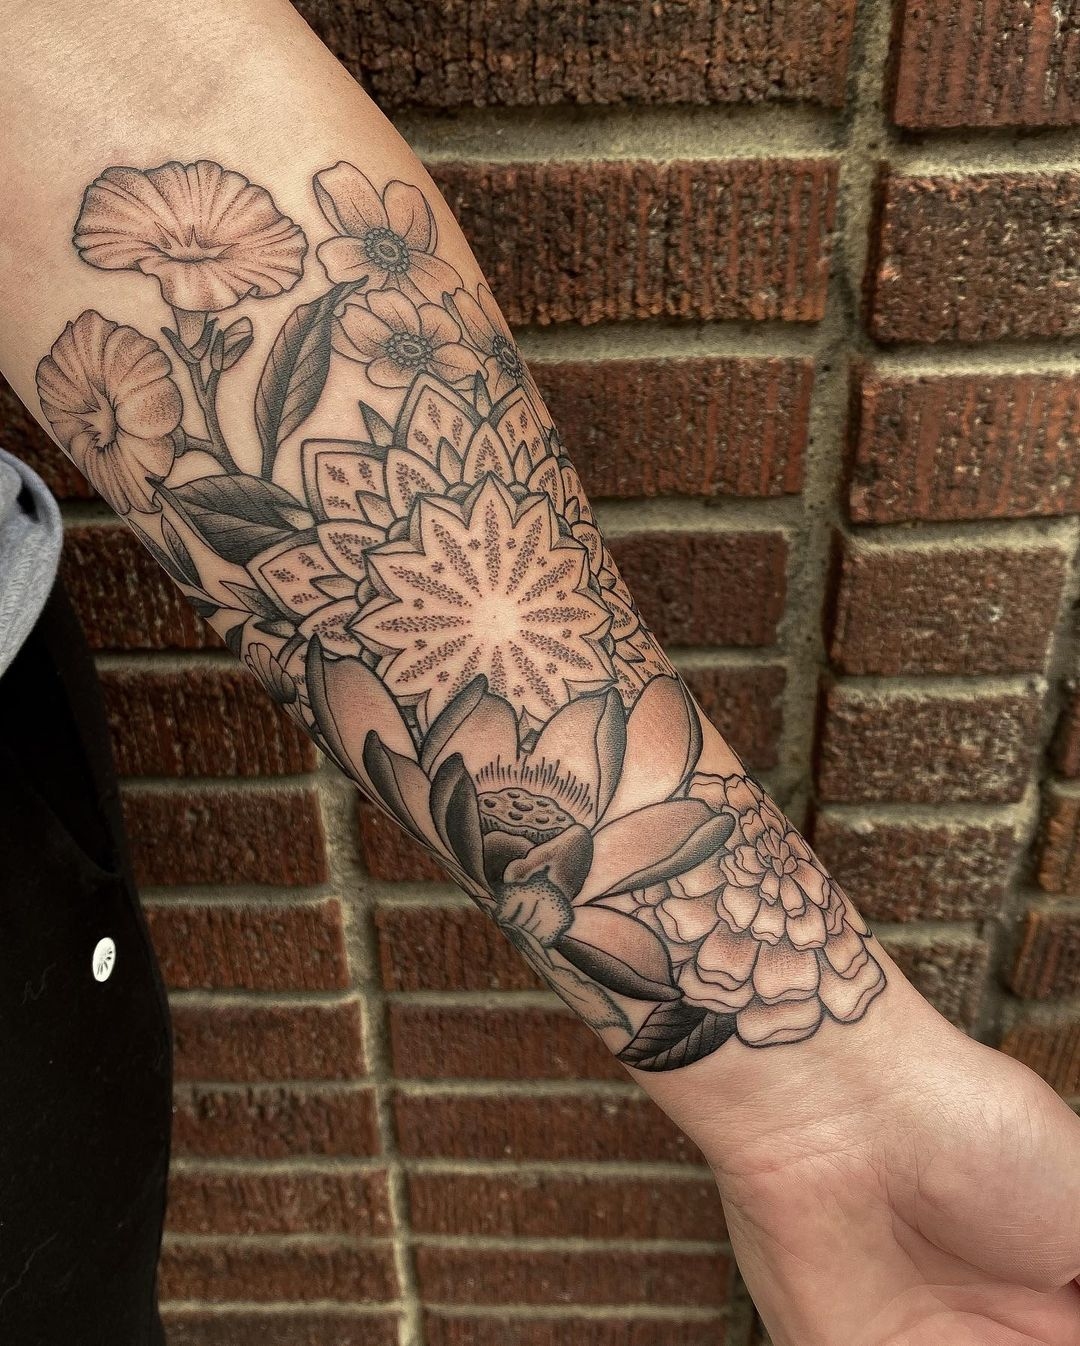 Fine line black and grey mandala tattoo surrounded by lotus flower, chrysanthemum, anemone and morning glory flowers created by tattoo artist Alan Lot of Sacred Mandala Studio in Durham, NC.